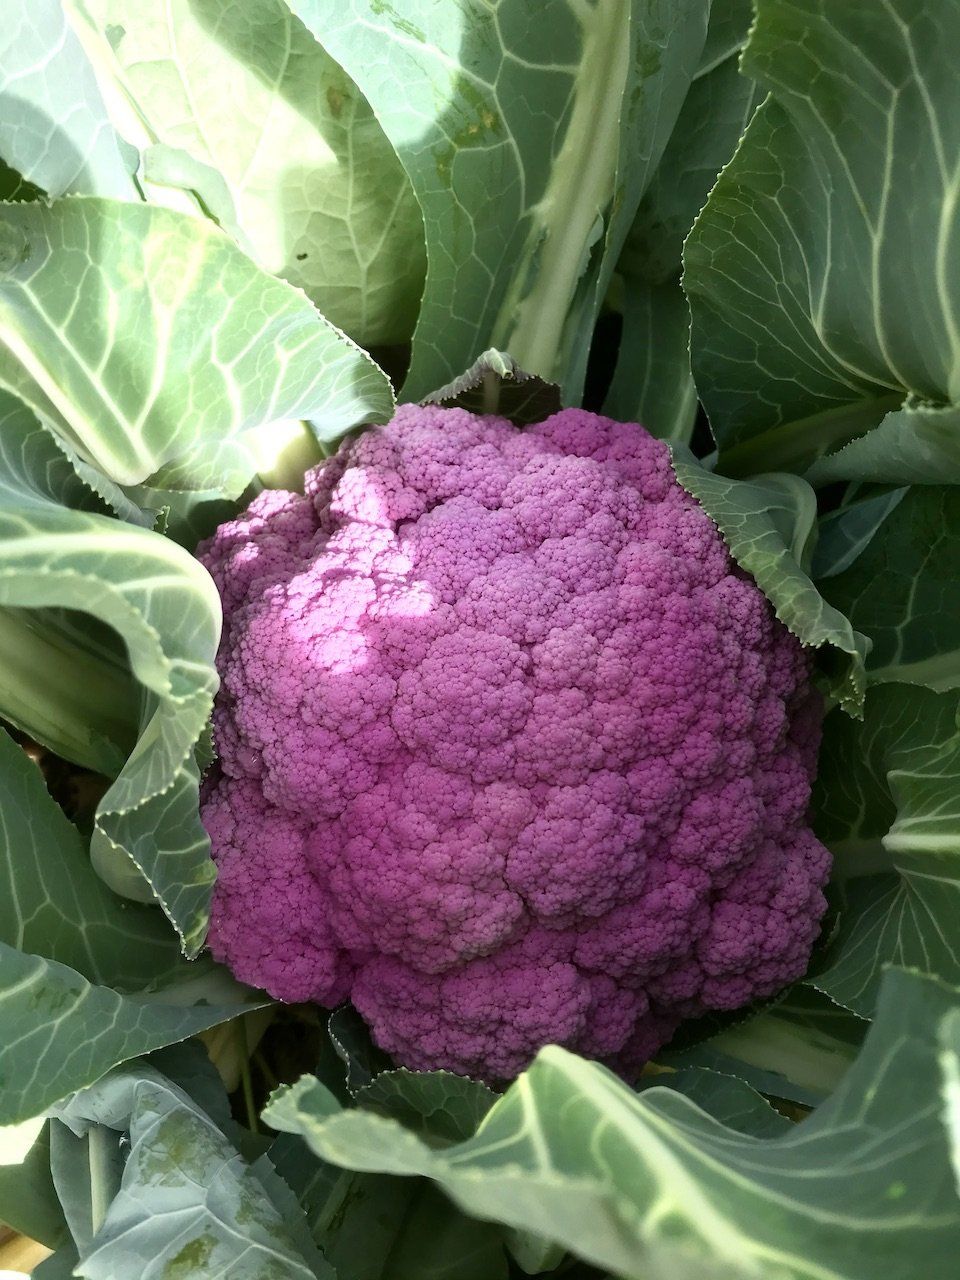 Previous Happening: Purple Cauliflower, Delicata, and Mustard Greens Available this Week